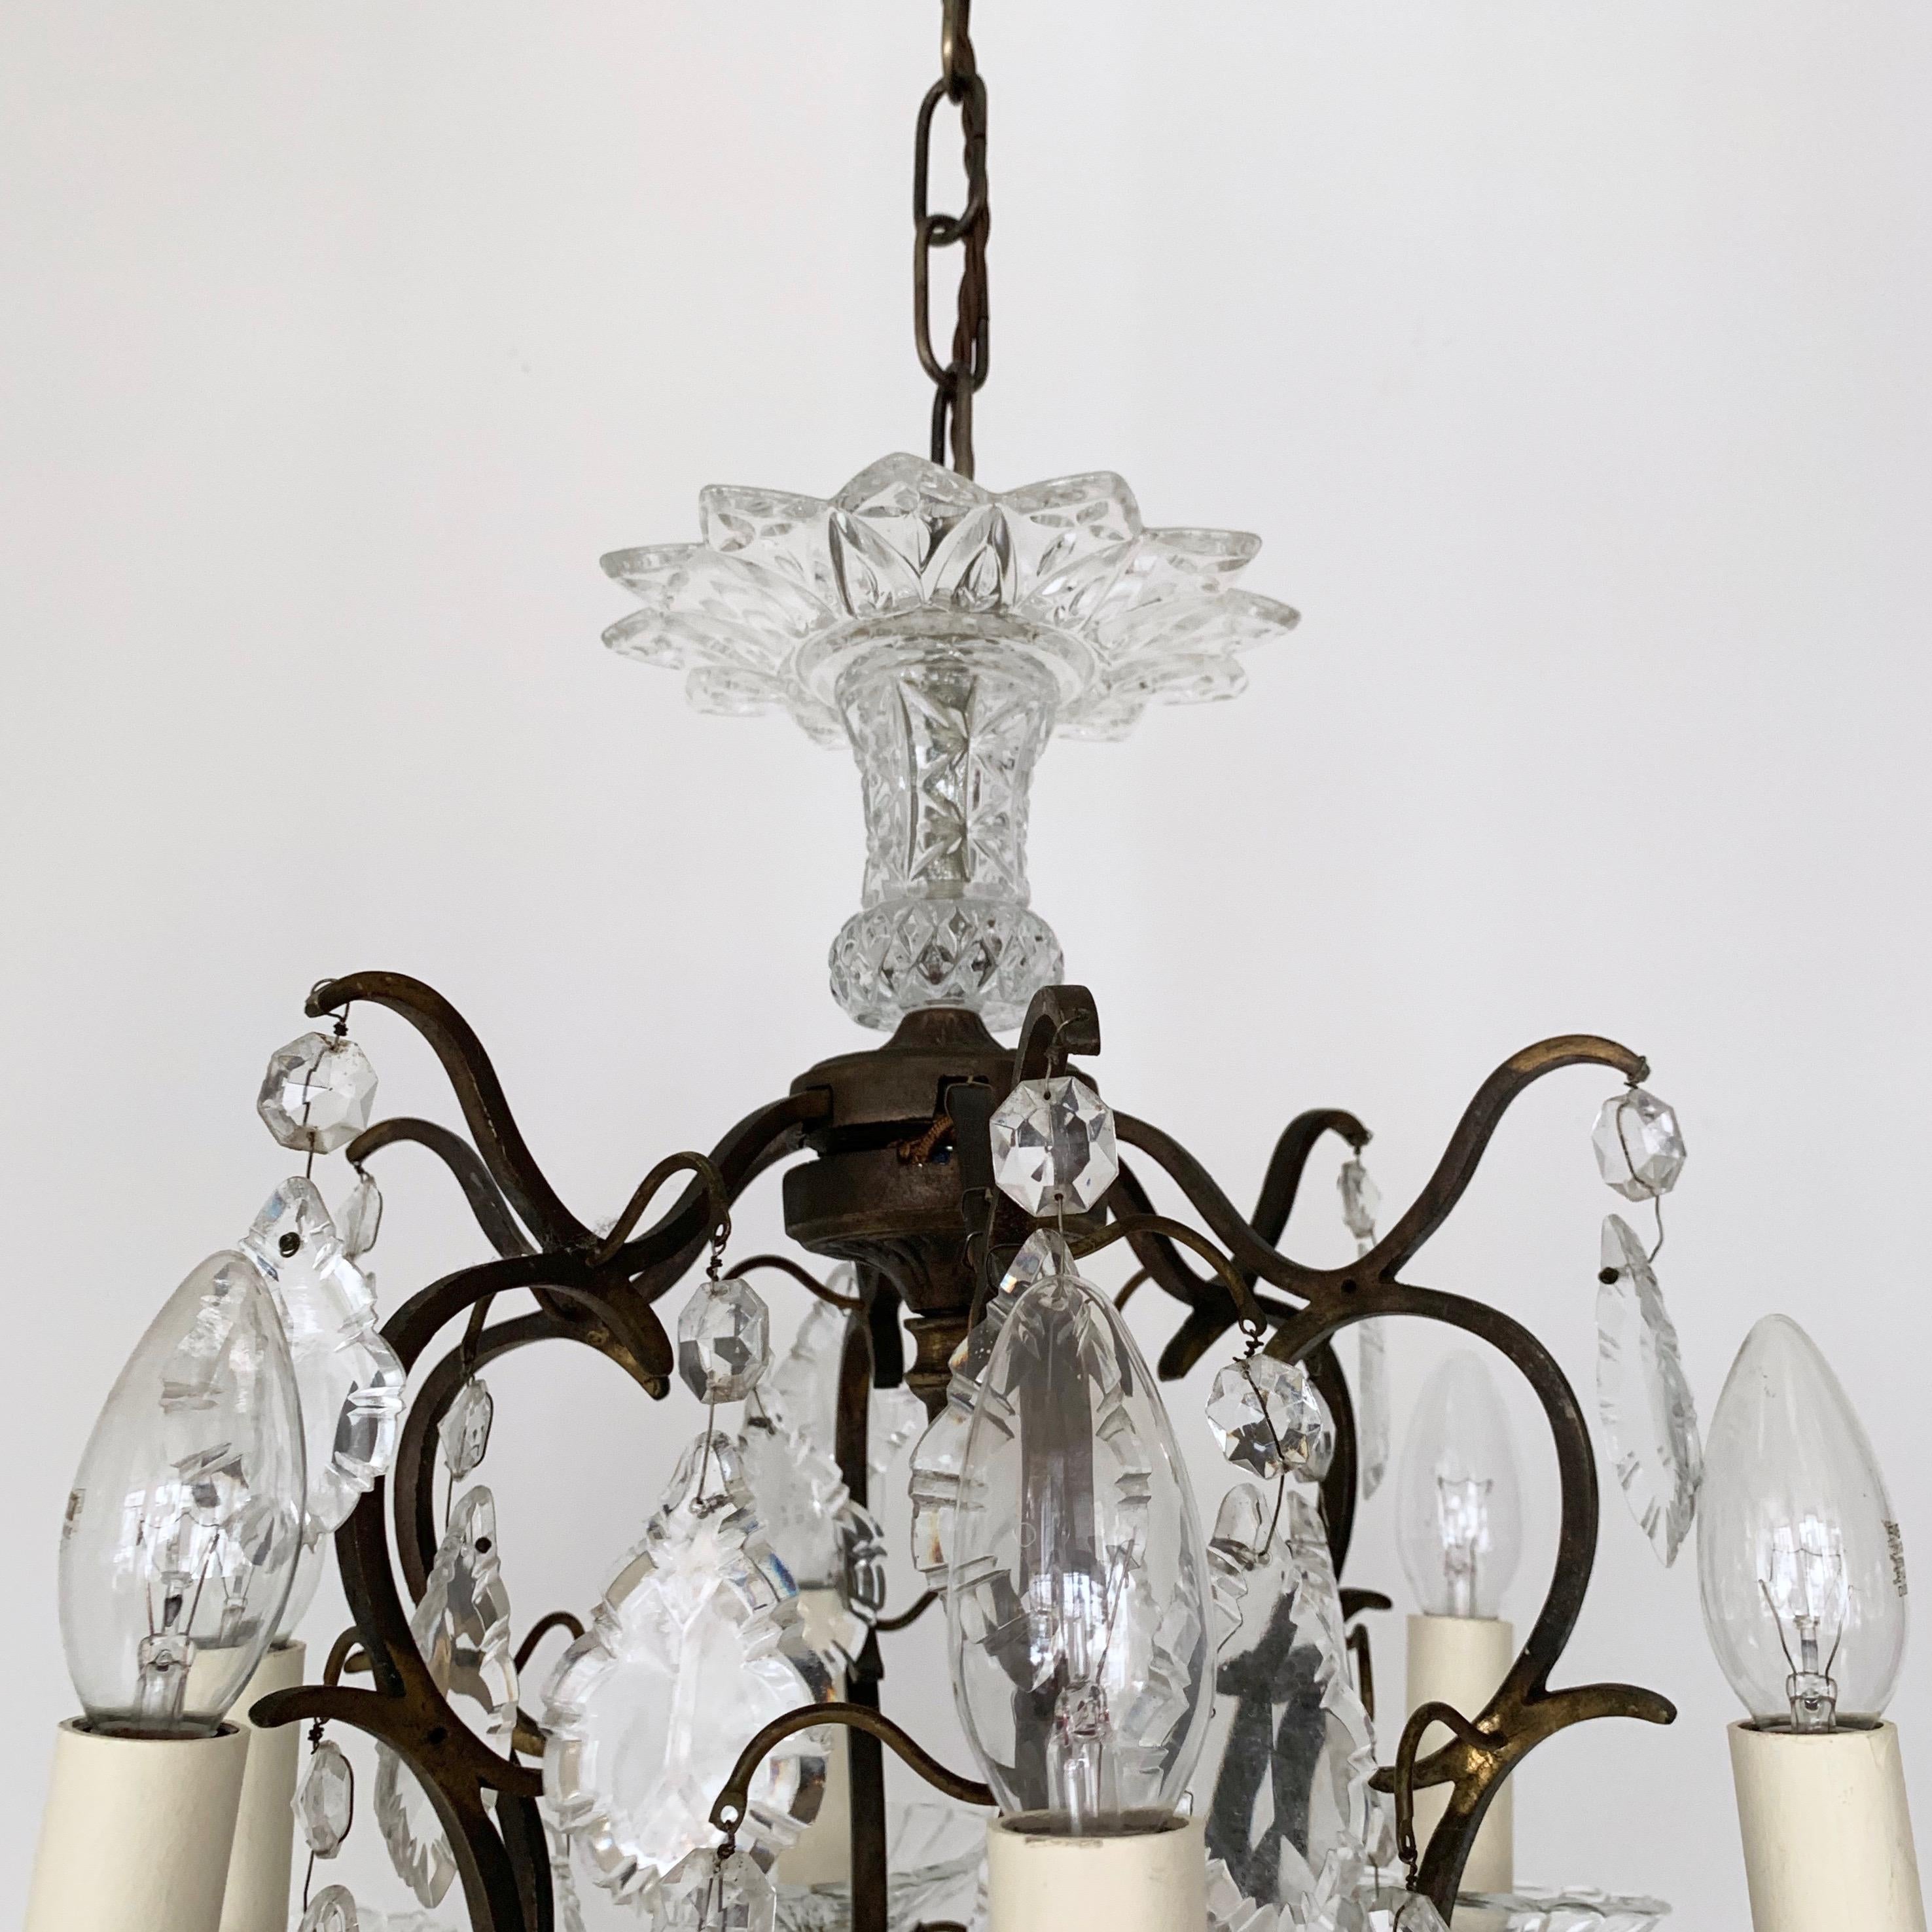 20th Century Italian Birdcage Chandelier with Glass Details For Sale